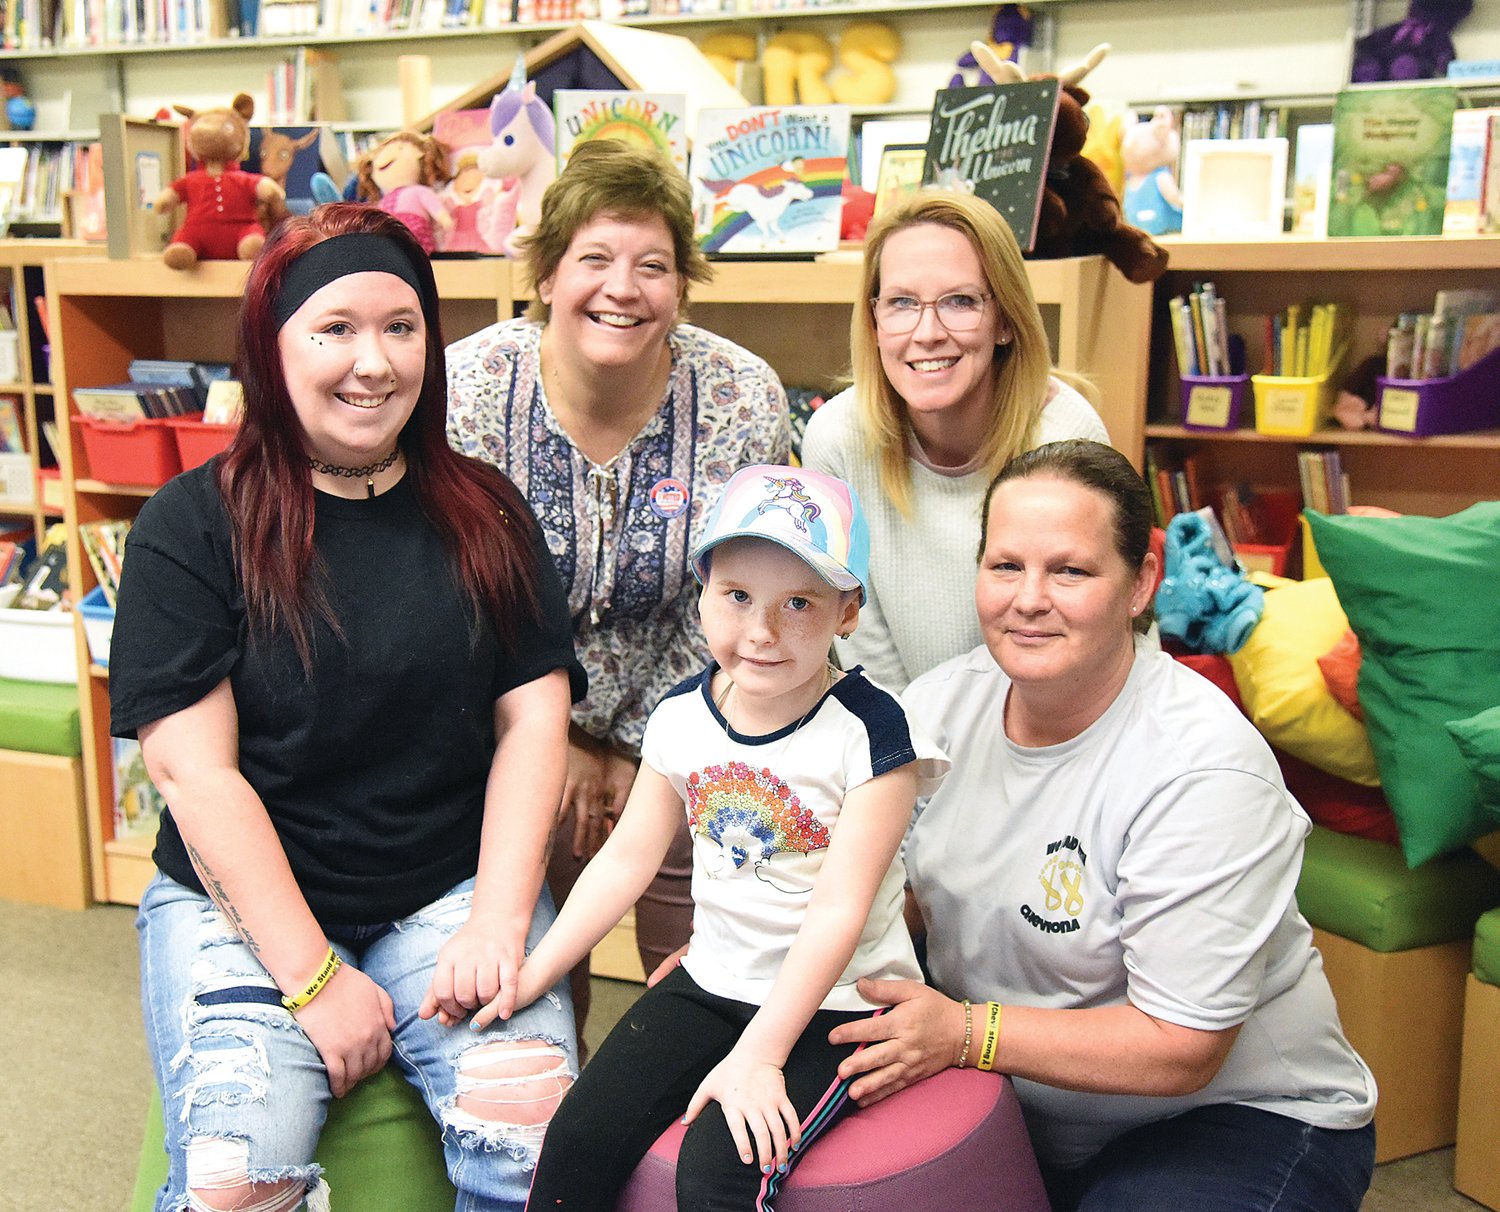 Posing for a photo in the Green Ridge School library on Tuesday are Chevi Meyer, 5, and from left her mother Destiny Strickland, STEAM teacher and librarian Nancey Dove, kindergarten teacher Jill Piscopo, and grandmother Julie Meyer. Chevi is known for her smile and freckles, and her love of unicorns and gold stars.